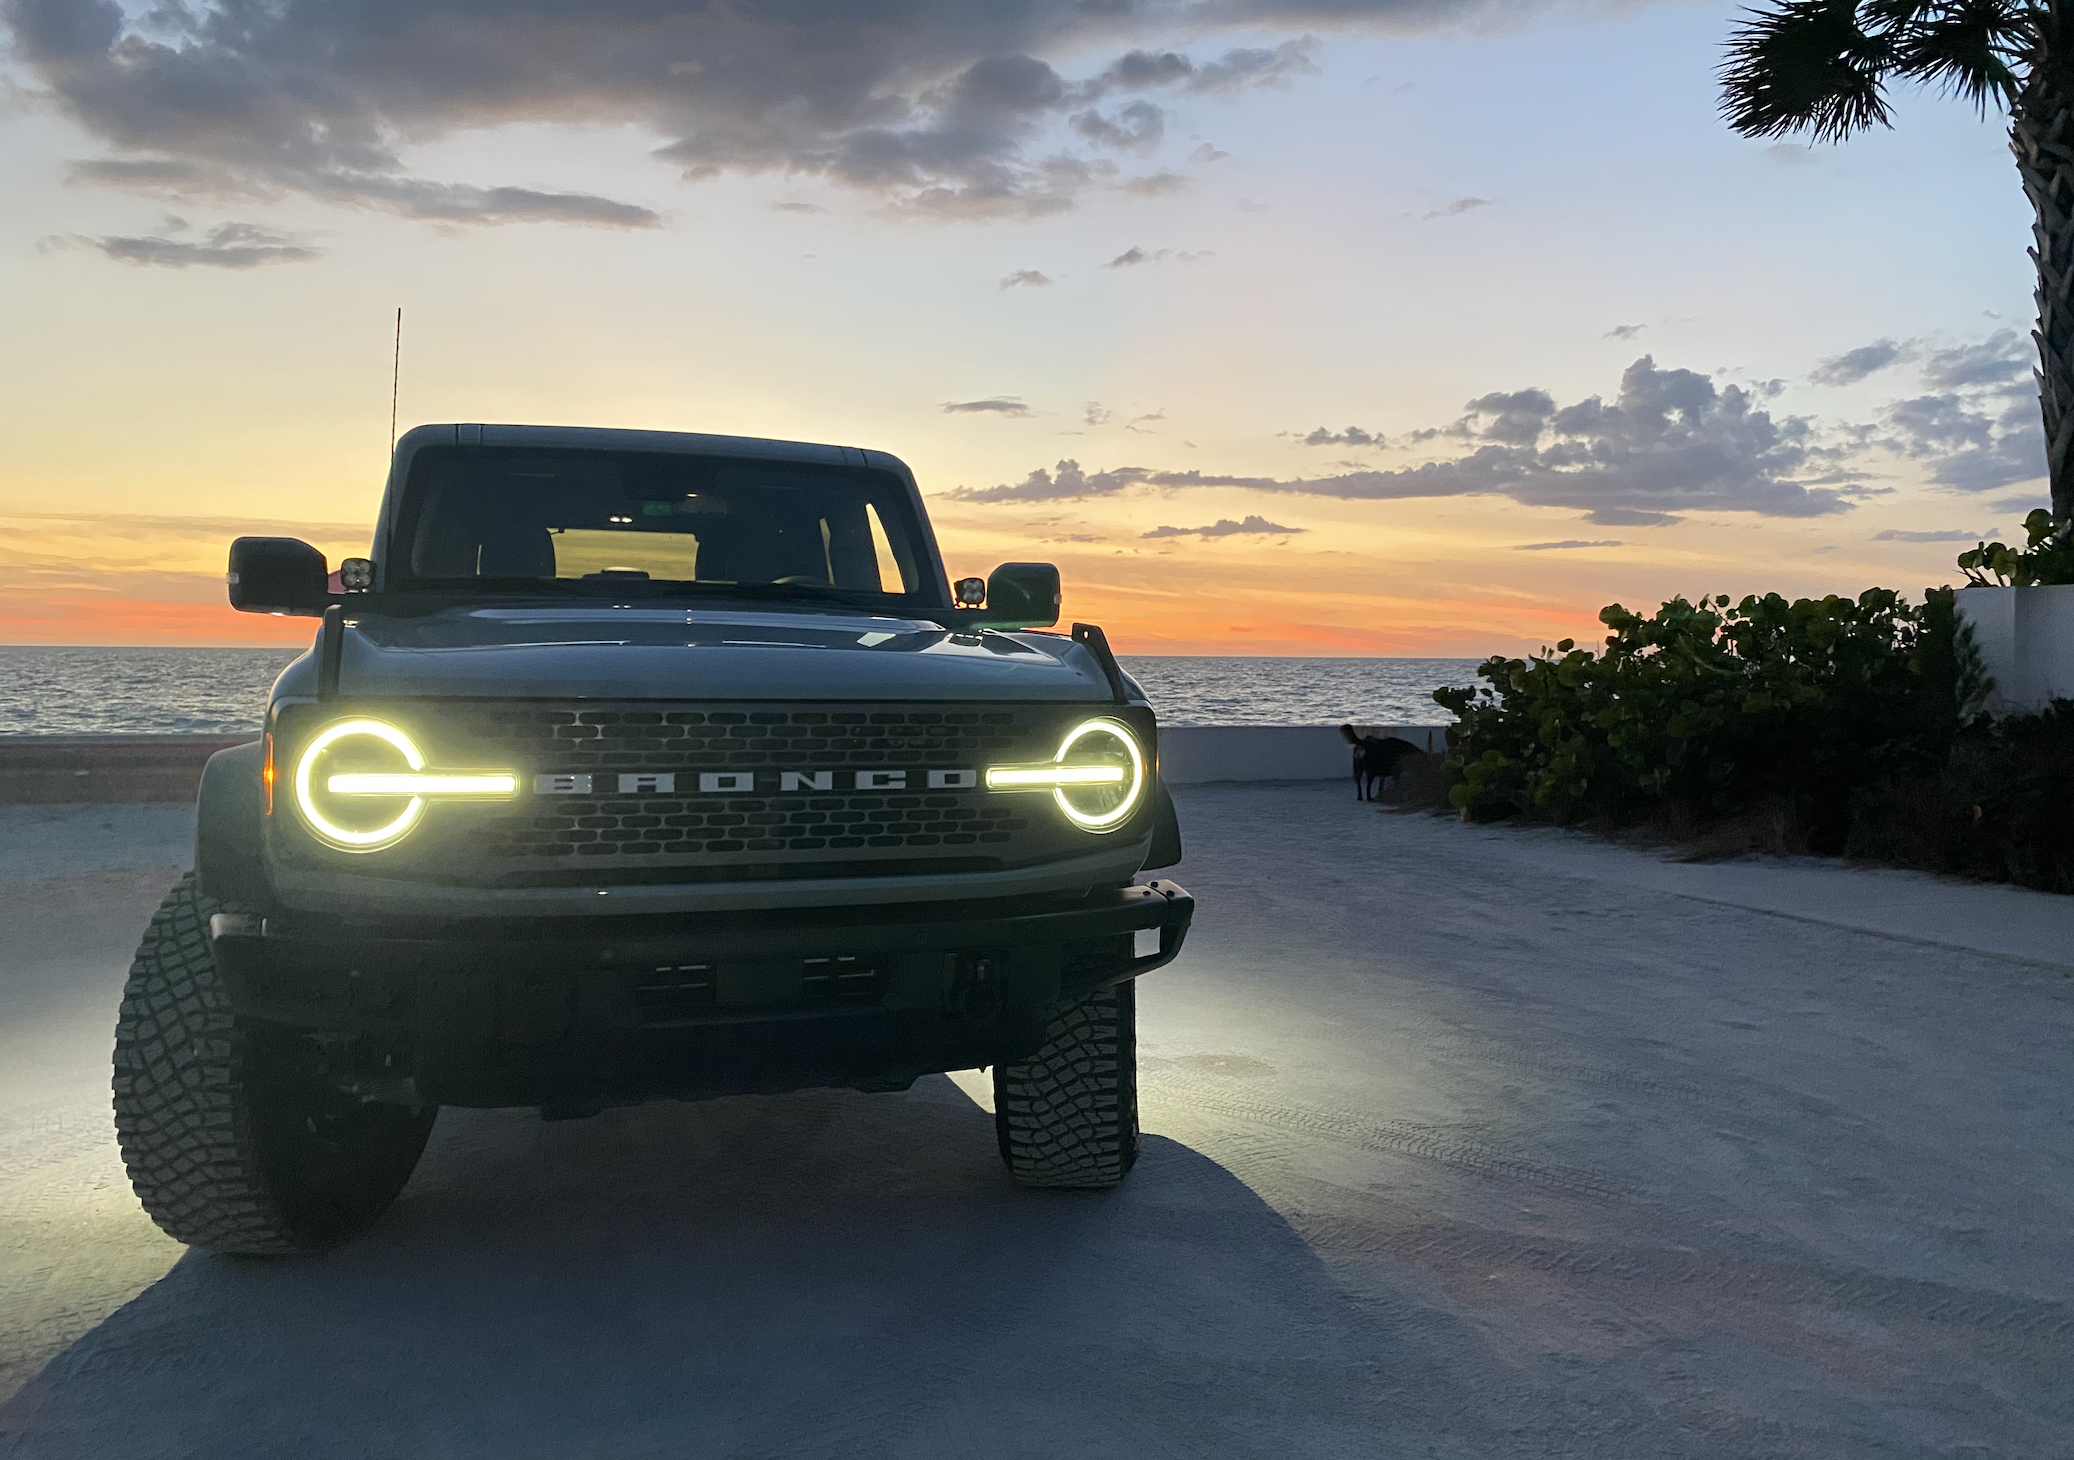 Ford Bronco Let’s see those beach pics! Screen Shot 2022-04-16 at 11.45.18 PM